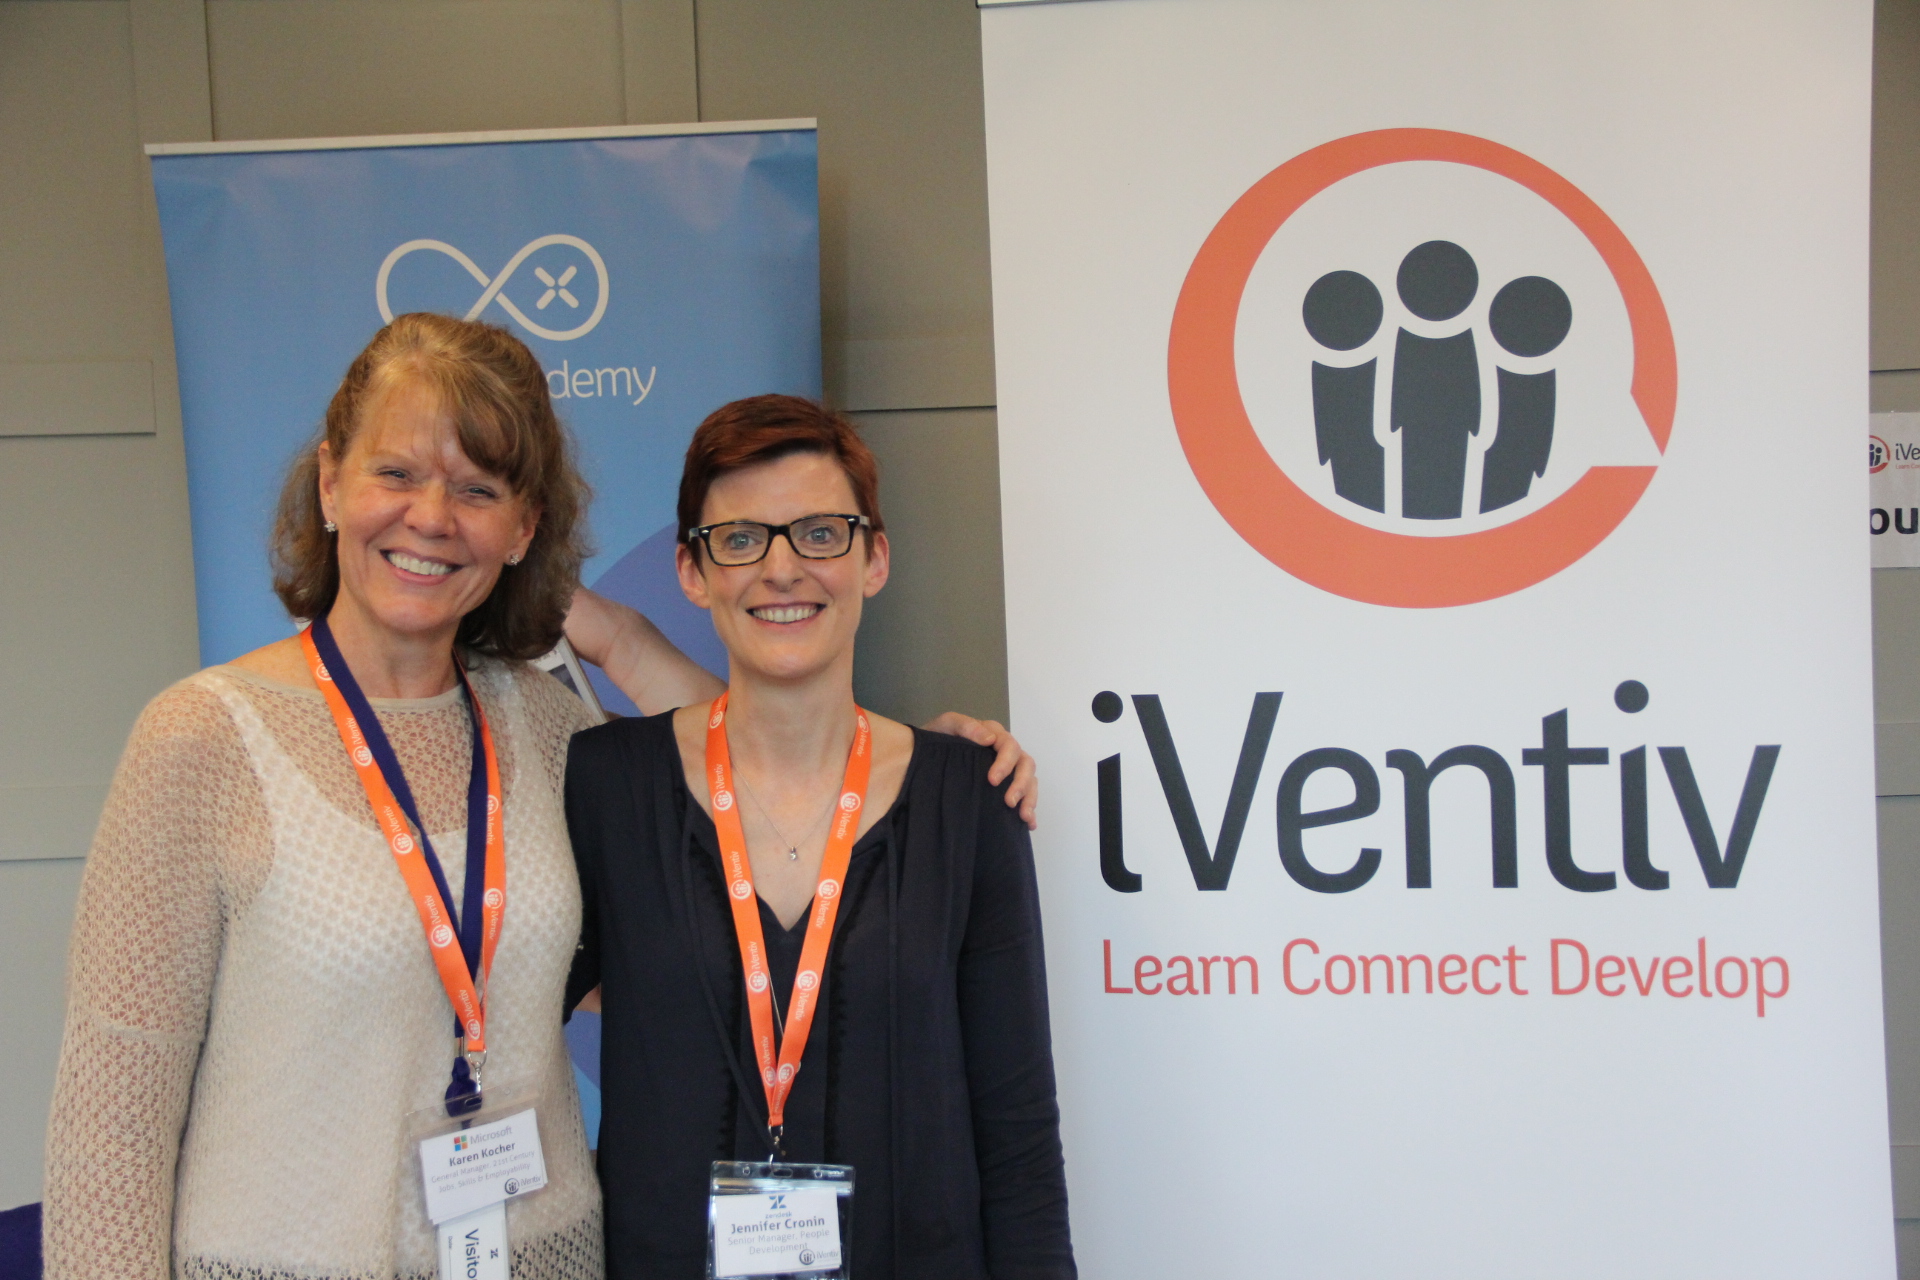 Karen Kocher poses for a photo at an iVentiv event